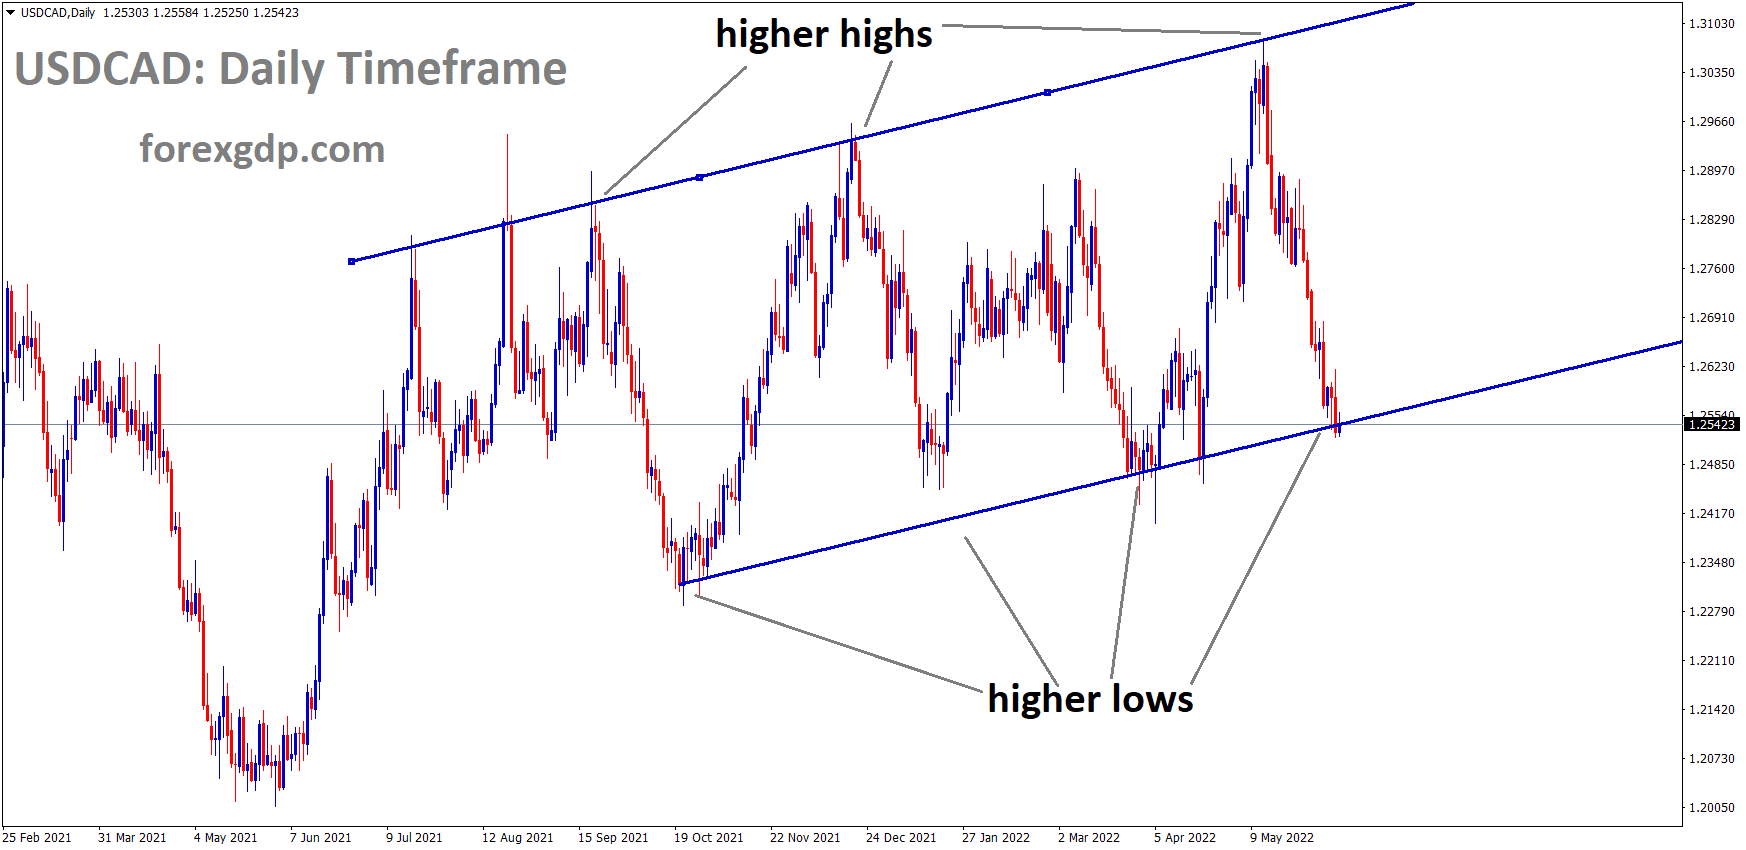 USDCAD is moving in an Ascending channel and the Market has reached the higher low area of the Ascending channel